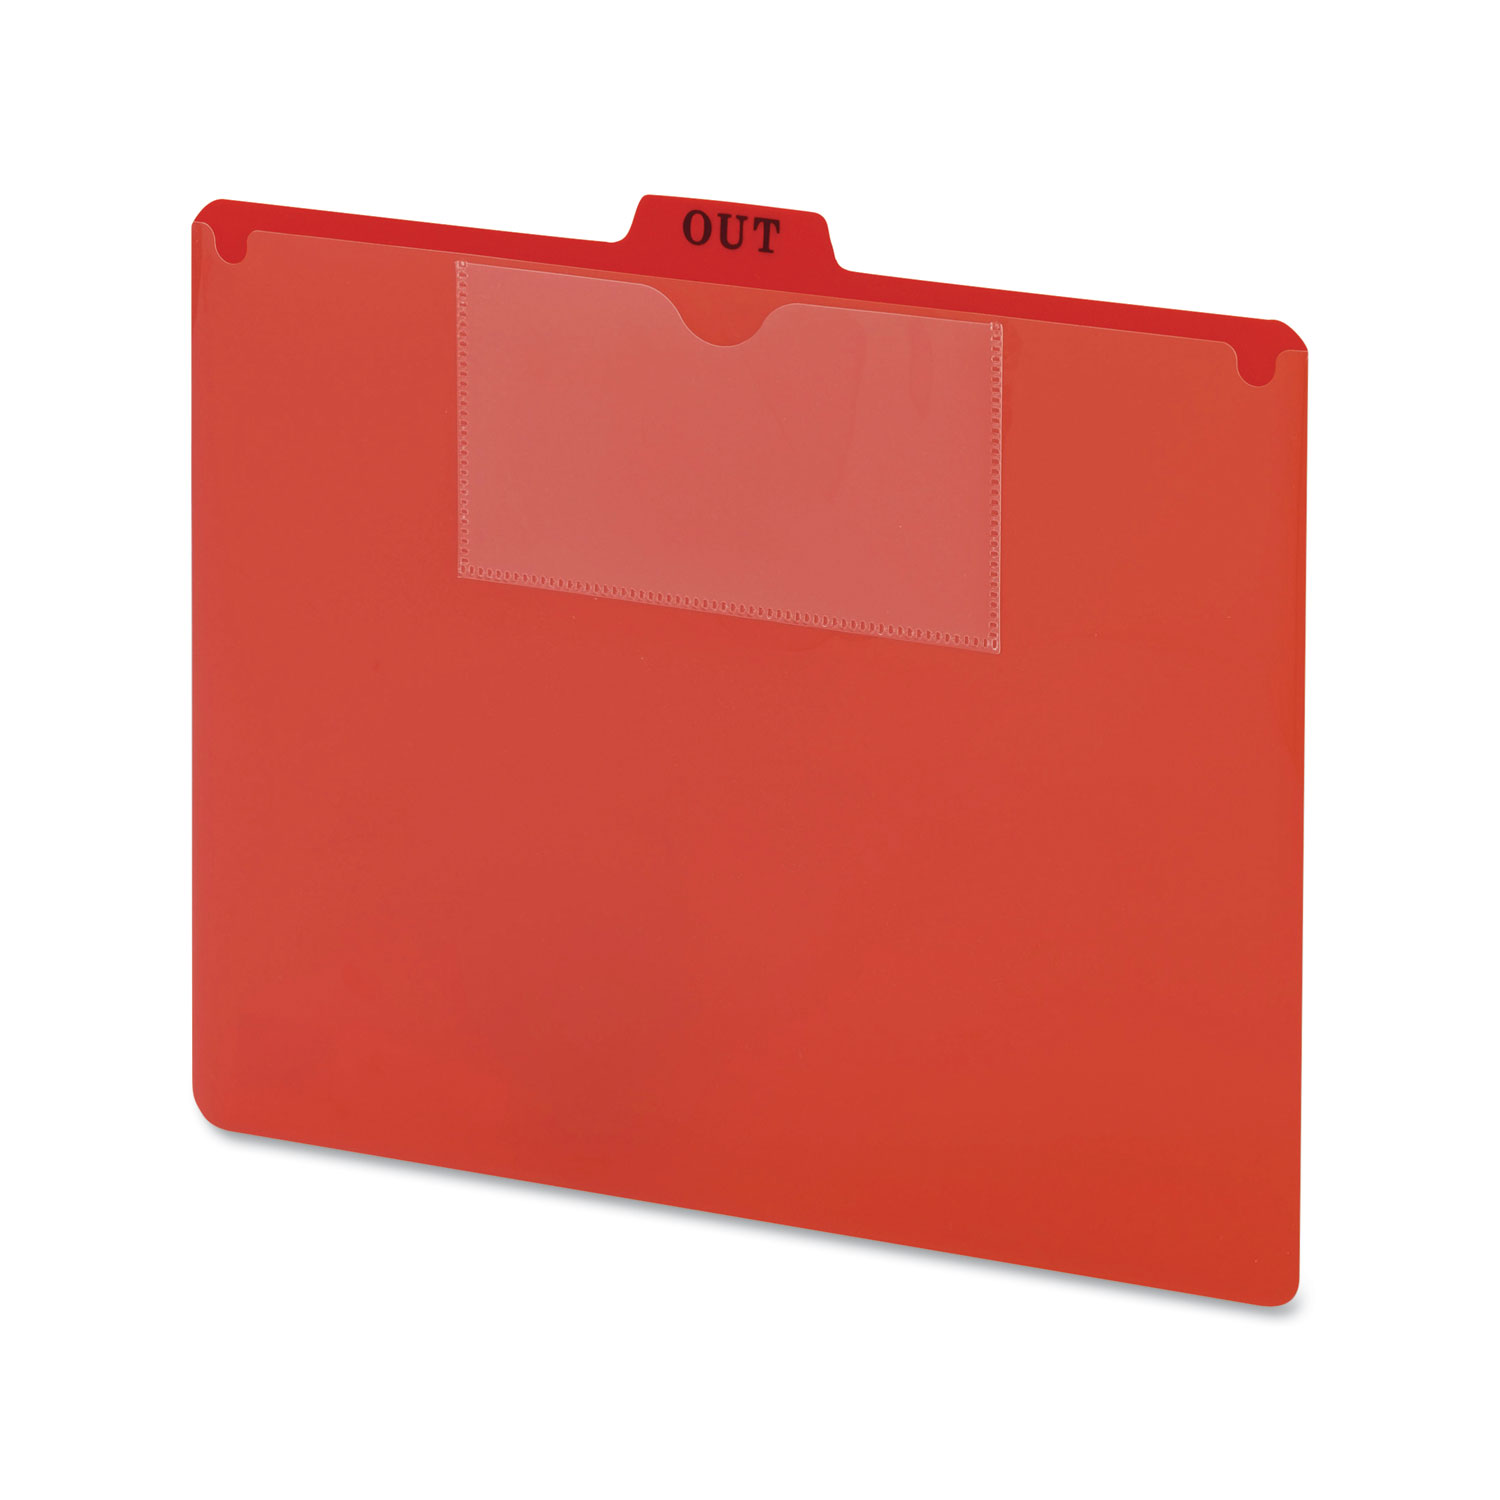  Smead 51920 Poly Out Guide, Two-Pocket Style, 1/5-Cut Top Tab, Out, 8.5 x 11, Red, 50/Box (SMD51920) 